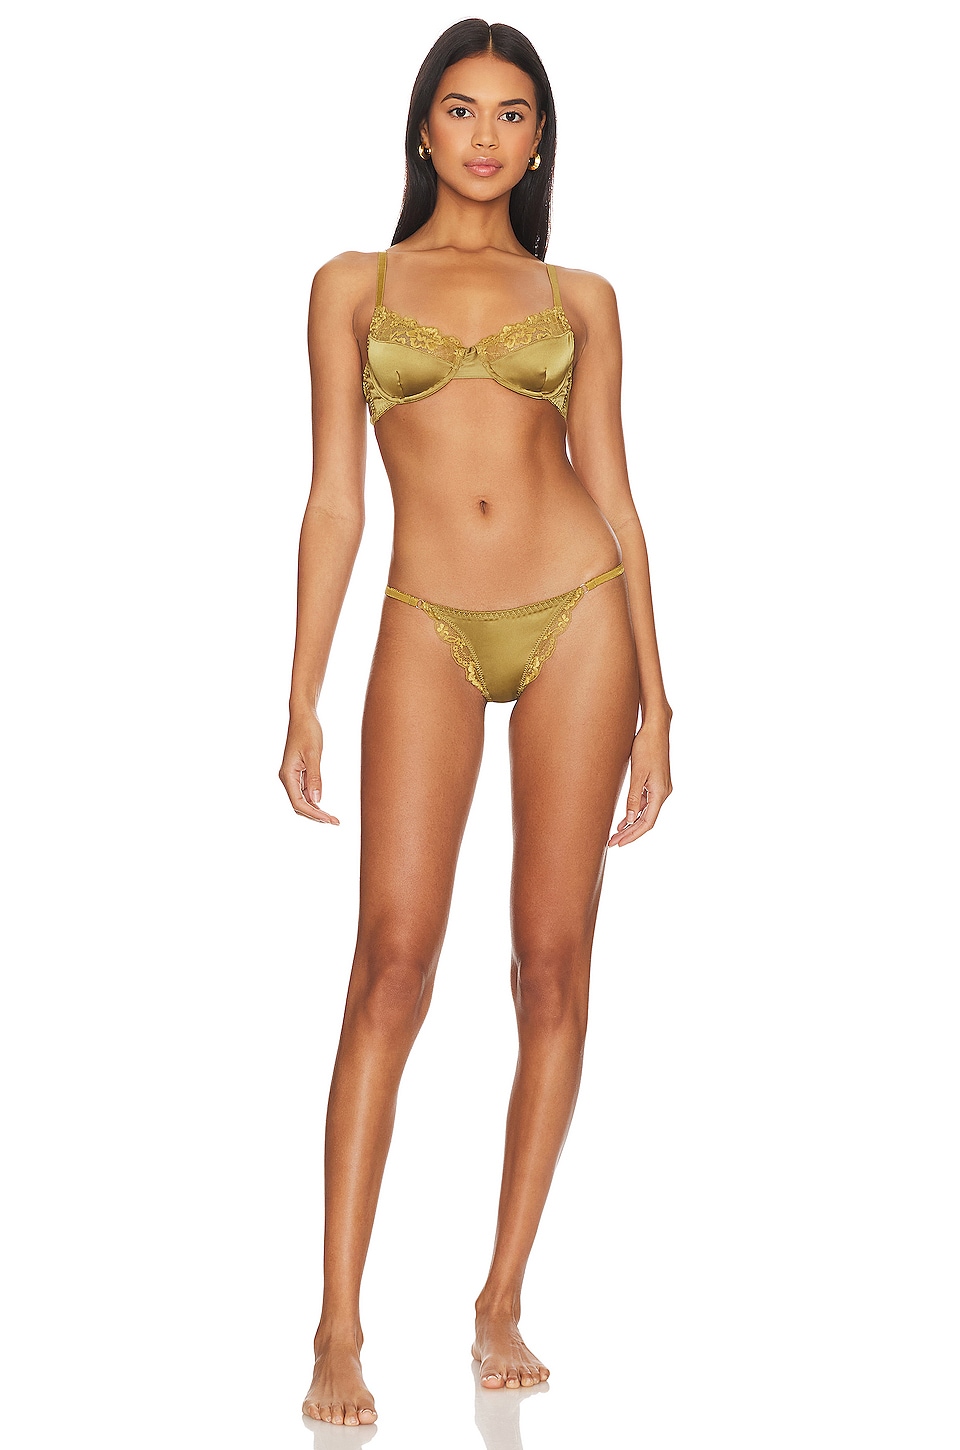 KAT THE LABEL Bowie Underwire Bra in Olive